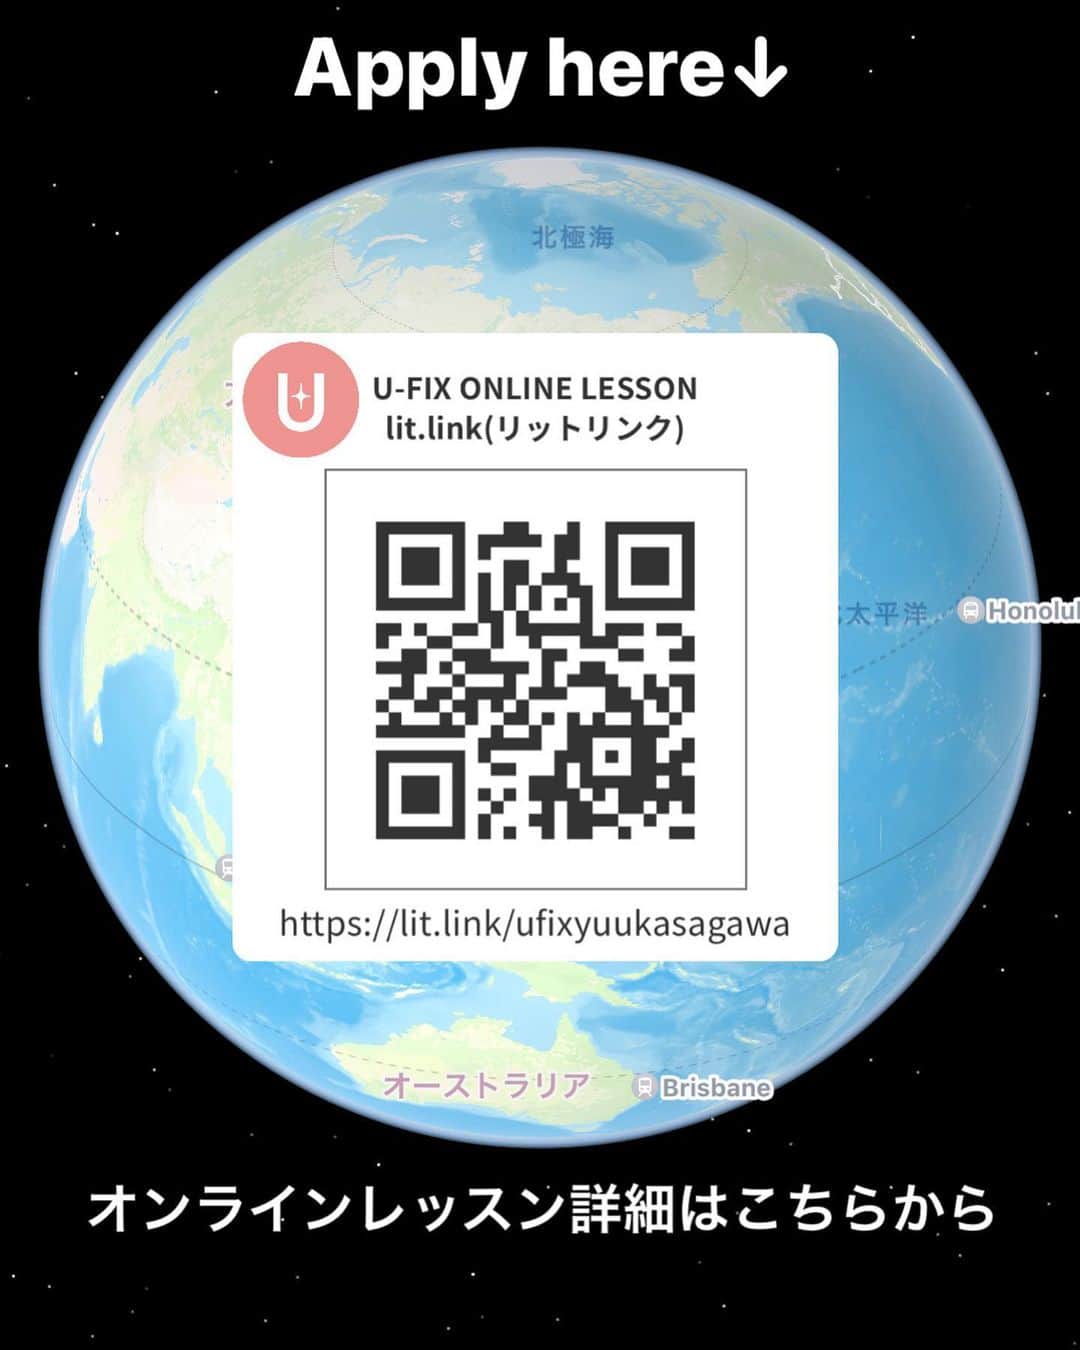 佐川裕香さんのインスタグラム写真 - (佐川裕香Instagram)「Hello everyone around the world✨🌸🌍  Conducted by yuuka sagawa Starting with the popular UFIX online lesson in Japan, a service that allows people from all over the world to participate will begin!  It's a three-step process of "prepare,training, and connecting the body." Align your posture to a functional and beautiful body!  This is not a temporary solution, but an online lesson for those who want to fundamentally change their bodies.  The lesson is in Japanese. The video has subtitles so you can watch the lesson carefully!  Languages are here ●Subtitle languages↓ *May be English only in some areas  English/한국어/繁體中文/‎العربية/Italiano Bahasa Indonesia/Svenska/Español/ไทย/Deutsch/Türkçe Français/Tiếng Việ/ Português/Русский  ★I would rather have a beautiful style than lose weight ★Functionality and appearance are more important than weight  I don't post it on social media such as YouTube or instgram.In the online lesson, we will give you detailed points and concentrate for 60 minutes.Many Japanese  say that the effectiveness is much higher than YouTube. If you want to change your body fundamentally, go to online lessons. I'm looking forward to having a UFIX online lesson with everyone around the world!  monthly online lesson Apply here↓ https://mosh.jp/services/107752  本日U-FIX月額オンラインレッスンが世界中の方にご受講いただけることになりました！  完全サポートをしてくださっている MOSH運営の皆さん、 そして簡単とは申し上げられない U-FIXオンラインレッスンを 忙しい日々の中で時間を作って 実践し続けて下さる 日本の生徒さんのお陰様です。  本当にありがとうございます。 コロナ前は対面レッスン漬けの日々 はじめはオンラインレッスンはとても否定的でした。  ですが、実際にレッスンしてみると オンラインレッスンは好きなタイミングで 移動もせず、何度も繰り返せて、途中で辞めることもできる！ 情報も集まっているので とにかく一つのレッスンの中身が濃い！！  対面レッスンを受けても、帰る頃には何を やったか覚えていないこともありますよね..  オンラインであれば 北海道の方でも、沖縄の方でも 東京に来ることなく今すぐにレッスンが可能なのが凄い！！  ですが、本日3年ぶりに会員さま限定で 対面レッスンを新規募集させていただいたのですが、みなさんのお顔を見て実際にお話しながらレッスンできるのはとっても嬉しかったです。  何より生徒さんが、オンラインで日々積み重ねられているので少しの修正ですぐに大きく変化することには驚きました  YouTube、オンライン、対面どれも良さがある😊  けれどどれもやってみないと、良さが分からなかった。  何事もまずはやってみる！ 少し大変だと感じる時は、ペースを変えながら 、お休みを入れながらもとにかくまず続ける。  これを多くの方から、日々教えて頂いてます。 本当にありがとうございます！！ 素敵な春をお迎えください🌸  -----------------------------------------------------  【日本版】U-FIXオンラインレッスン🇯🇵  ▶︎次回、お申込み →3/25(土)21:00〜予定‼️  プロフィールのURL、MOSHサイトから お申込み受付けさせて頂きます✨🌸  --------------------------------------------」3月21日 20時33分 - yuuka_08